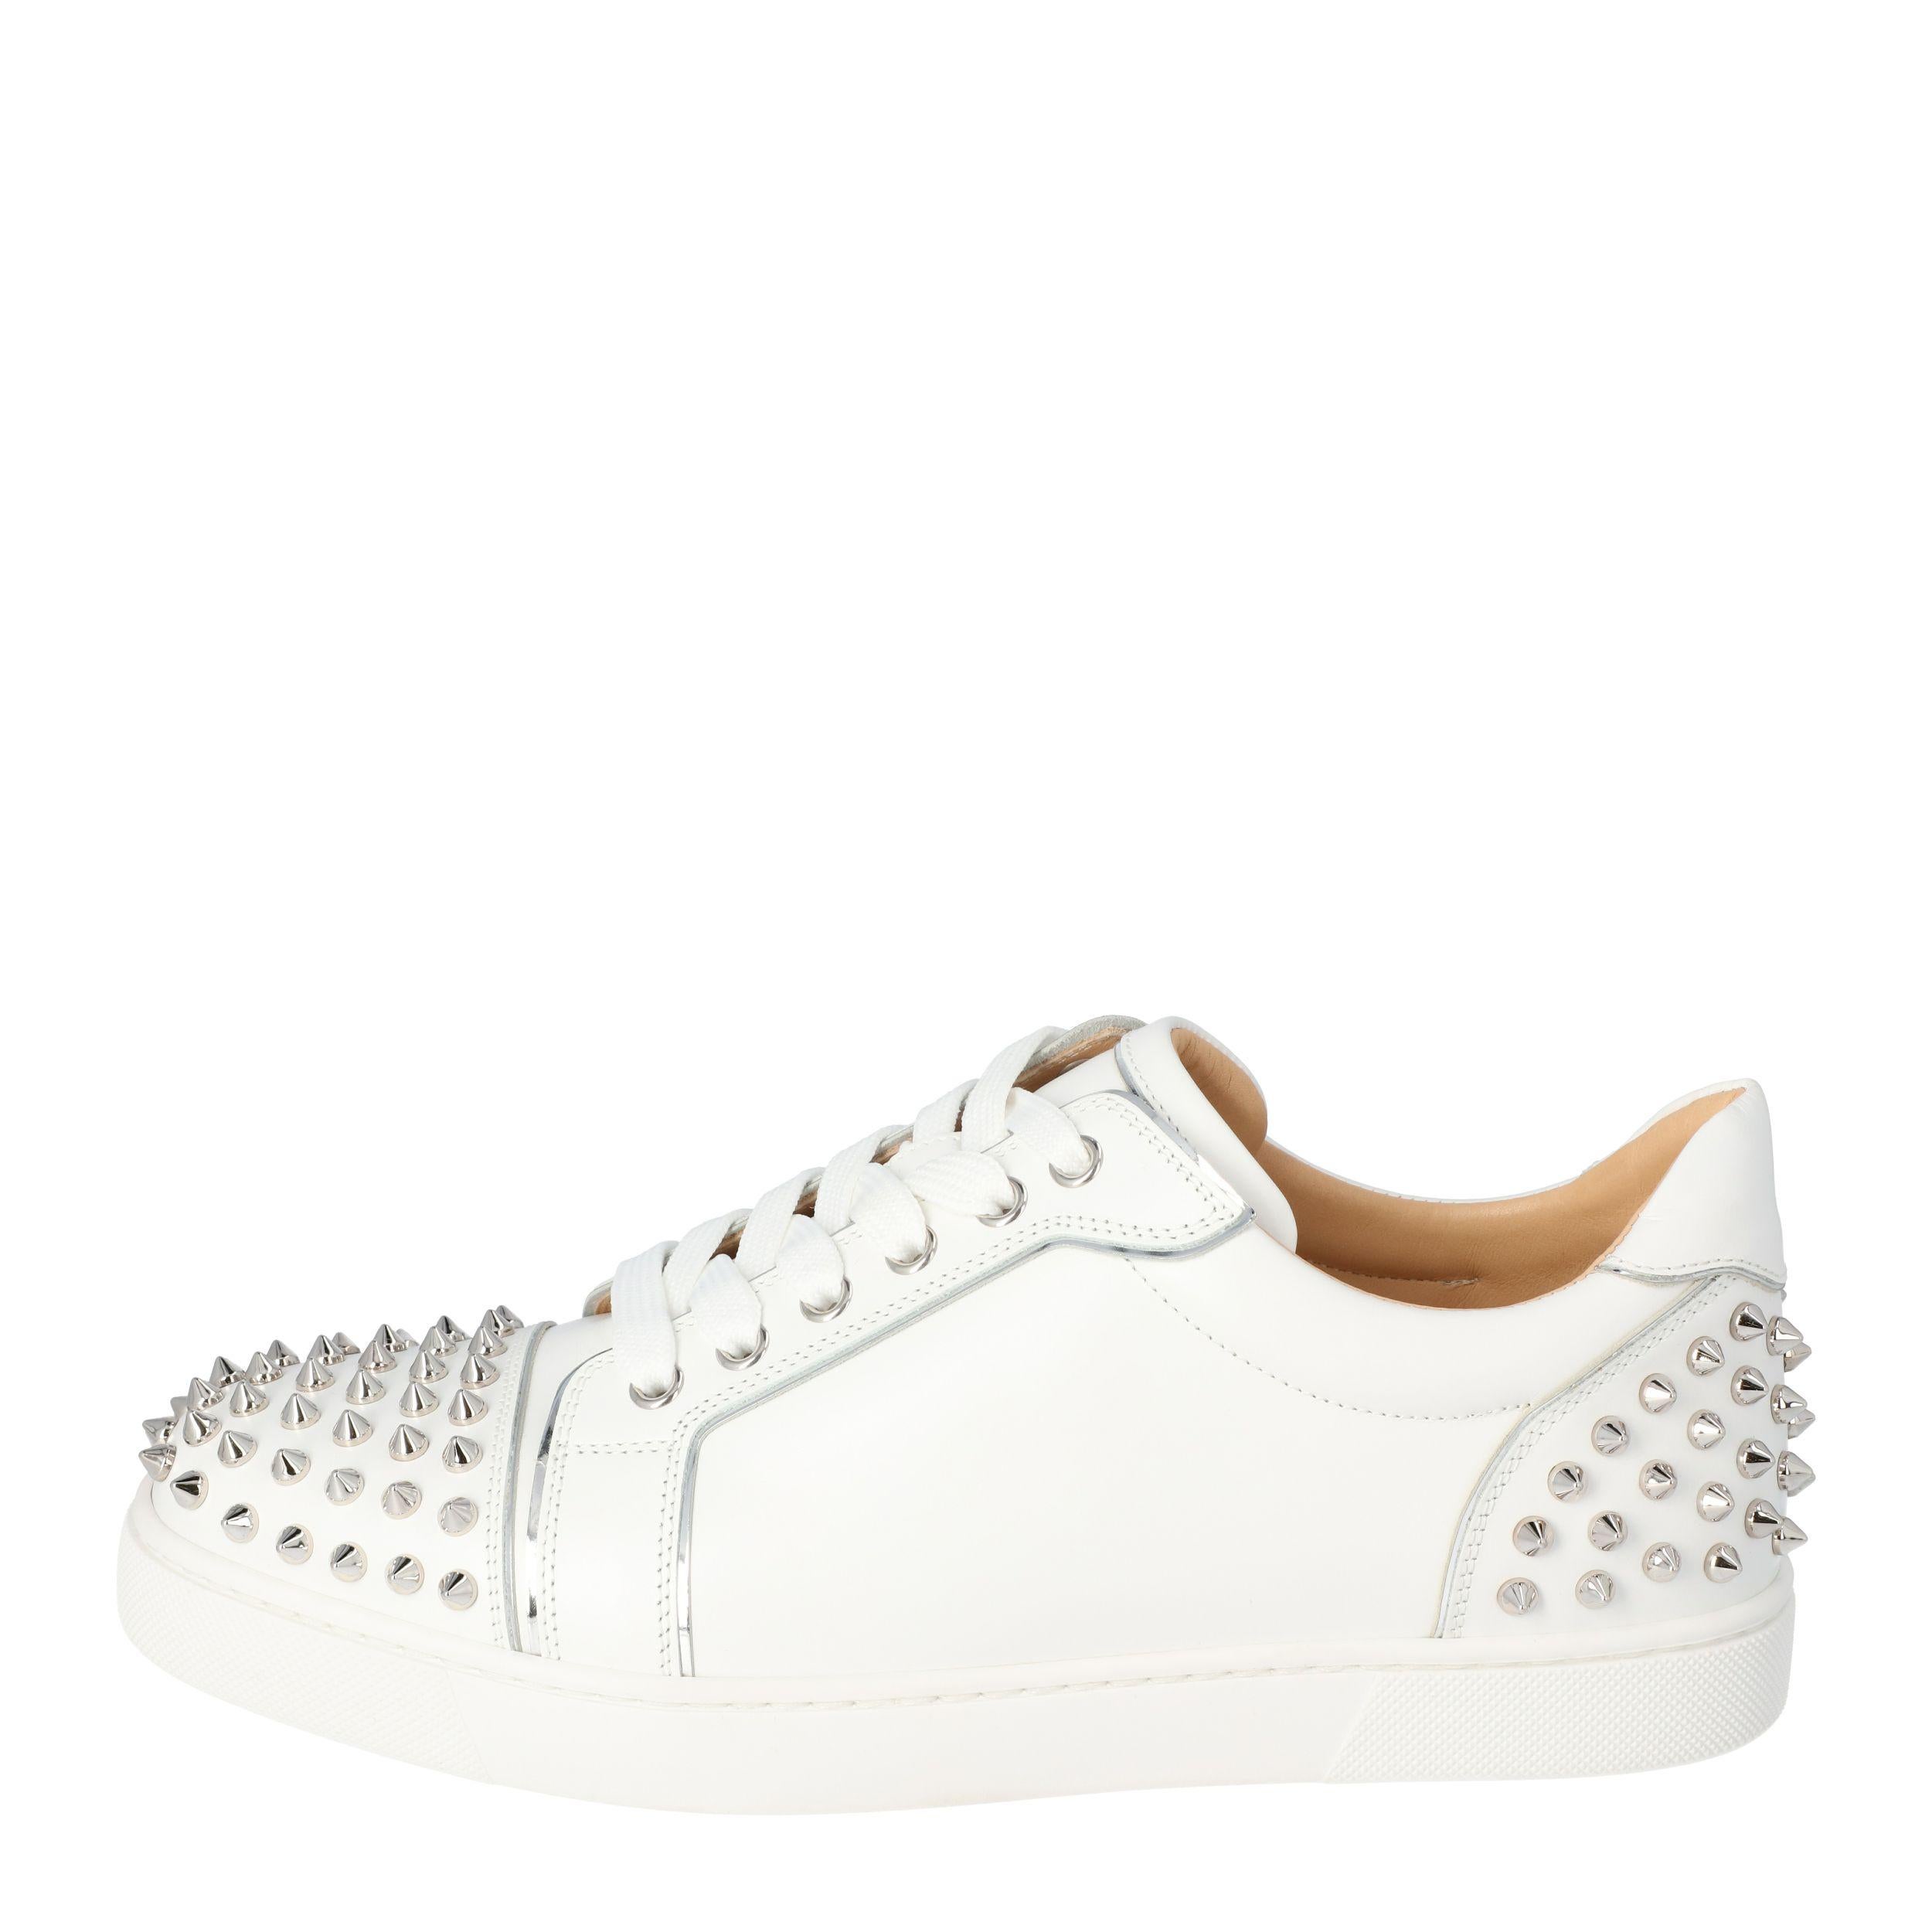 Embrace the look of contemporary styling with this pair of sneakers from the house of Christian Louboutin. Crafted from luxuriously fine leather, these stylish shoes feature a lace-up design for unmatched comfort. A spike studded design elevates the